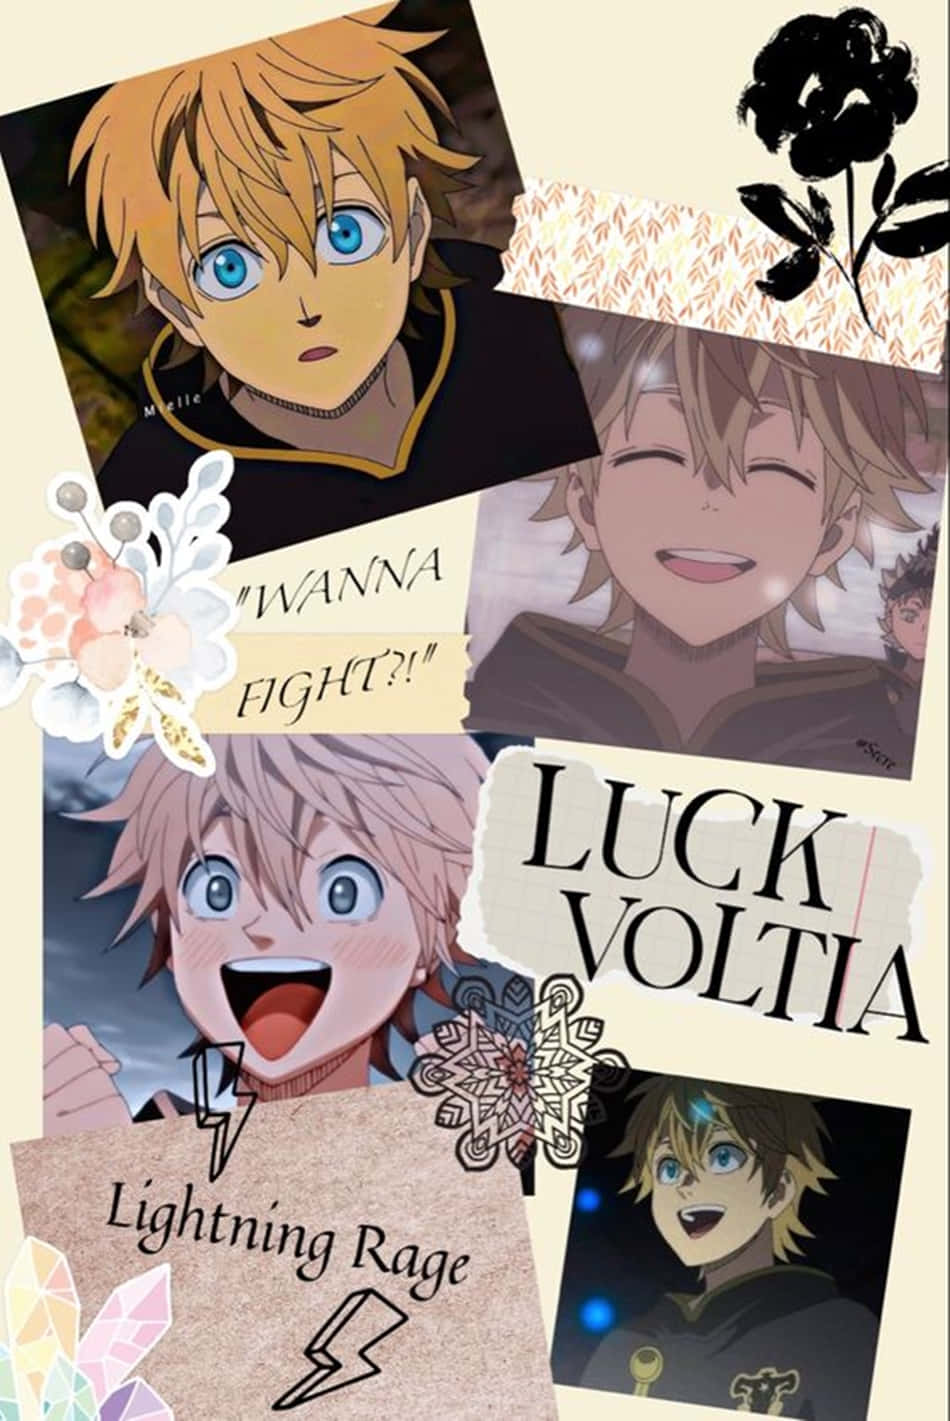 Unleash your magical power with Luck Voltia!